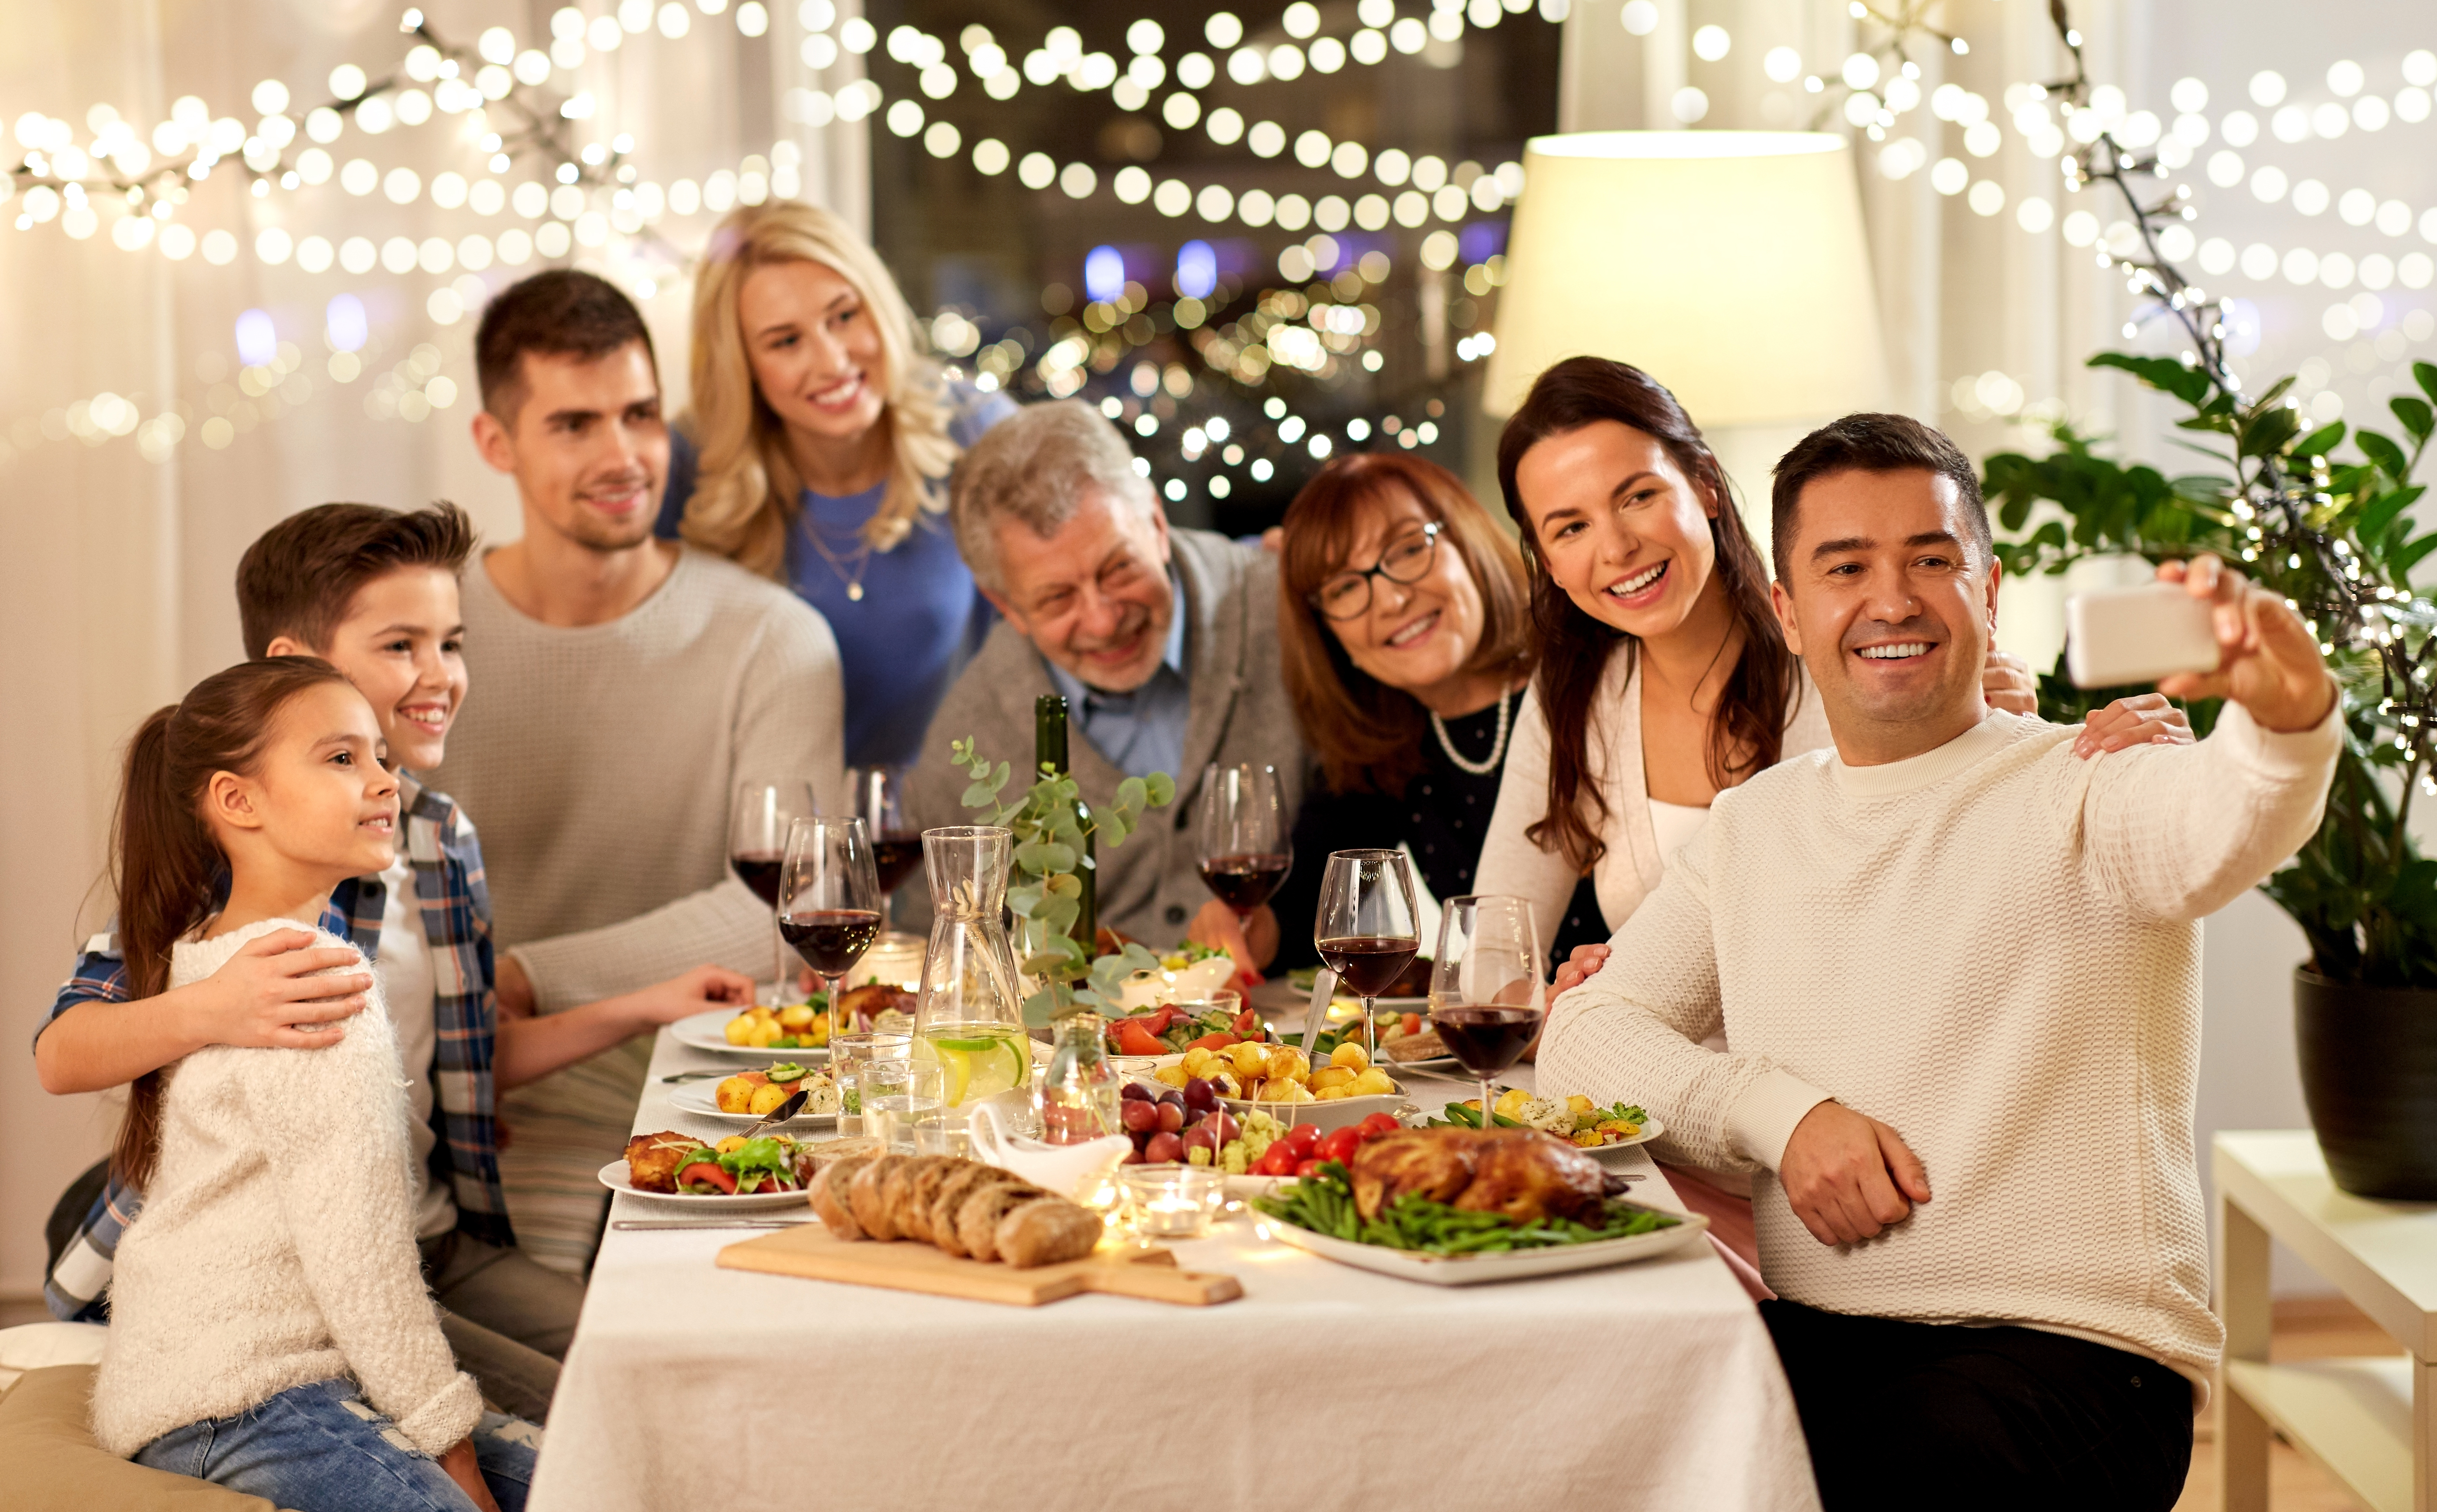 A family taking a selfie during a Christmas dinner | Source: Shutterstock